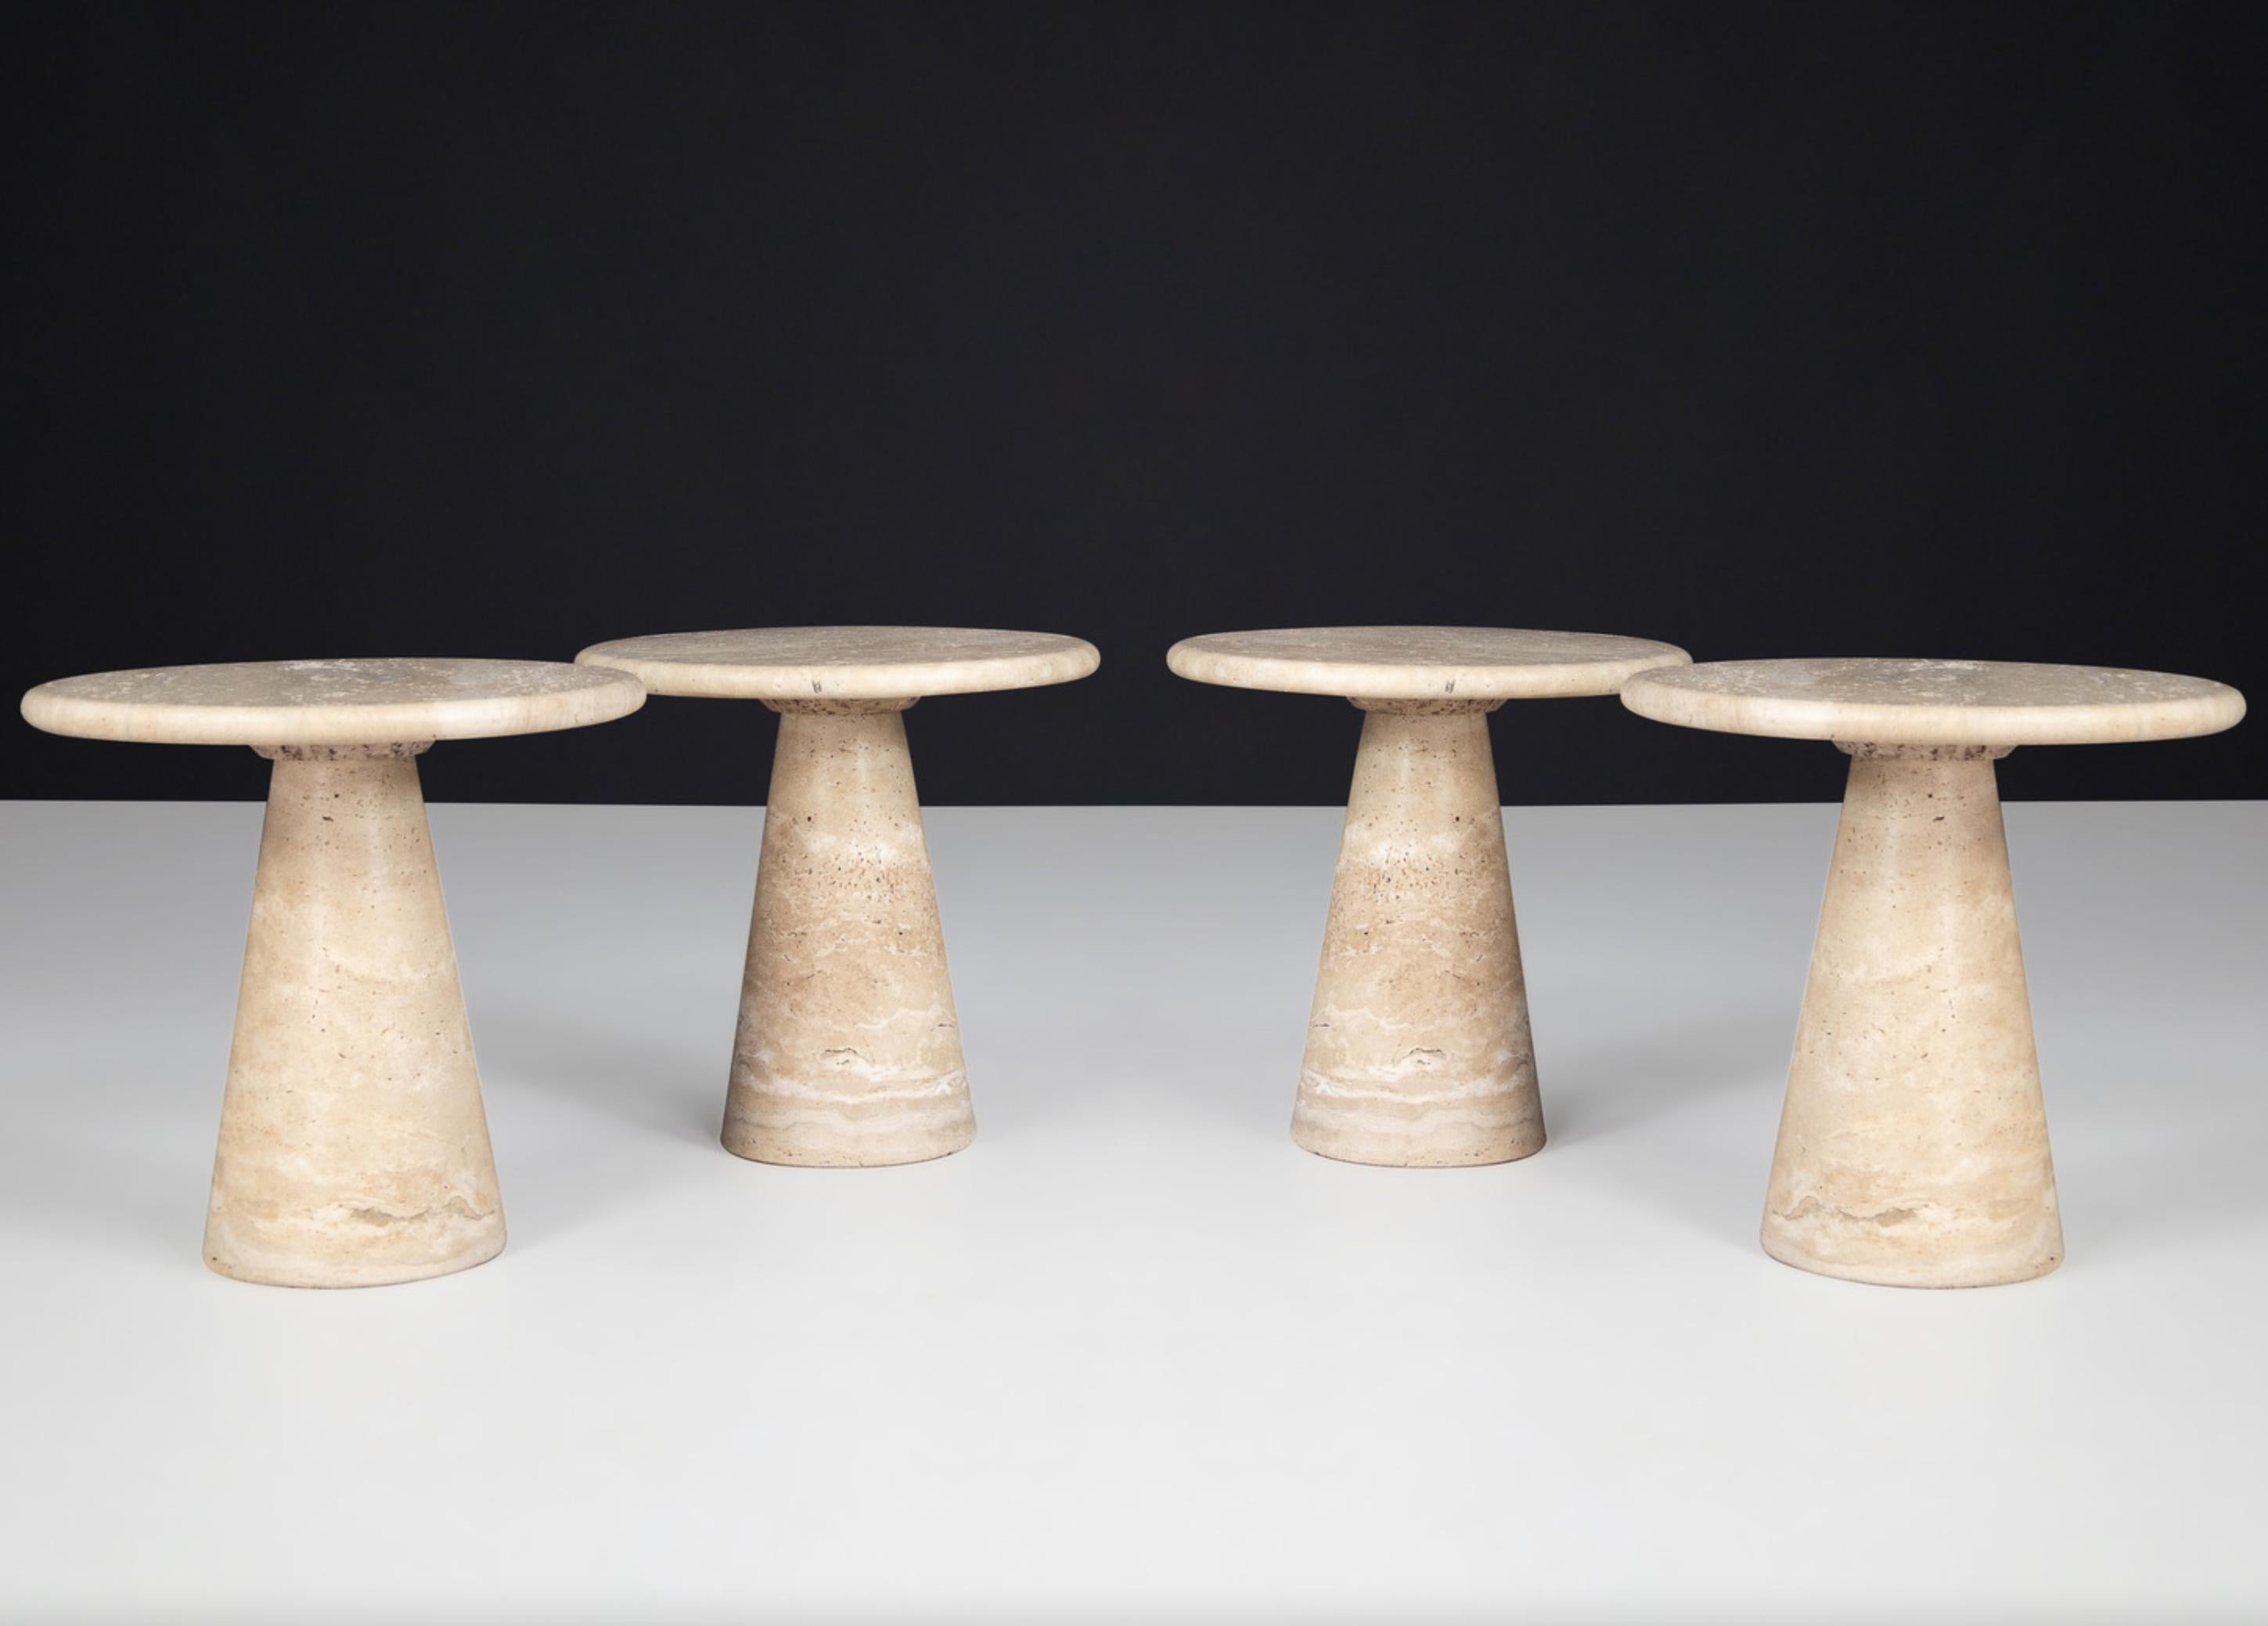 Modern circular travertine side tables or coffee tables, Italy 1980s

Set of four modern circular travertine side tables or coffee tables, Italy 1980s. A set of four circular side tables style of Angelo Mangiarotti in travertine with a